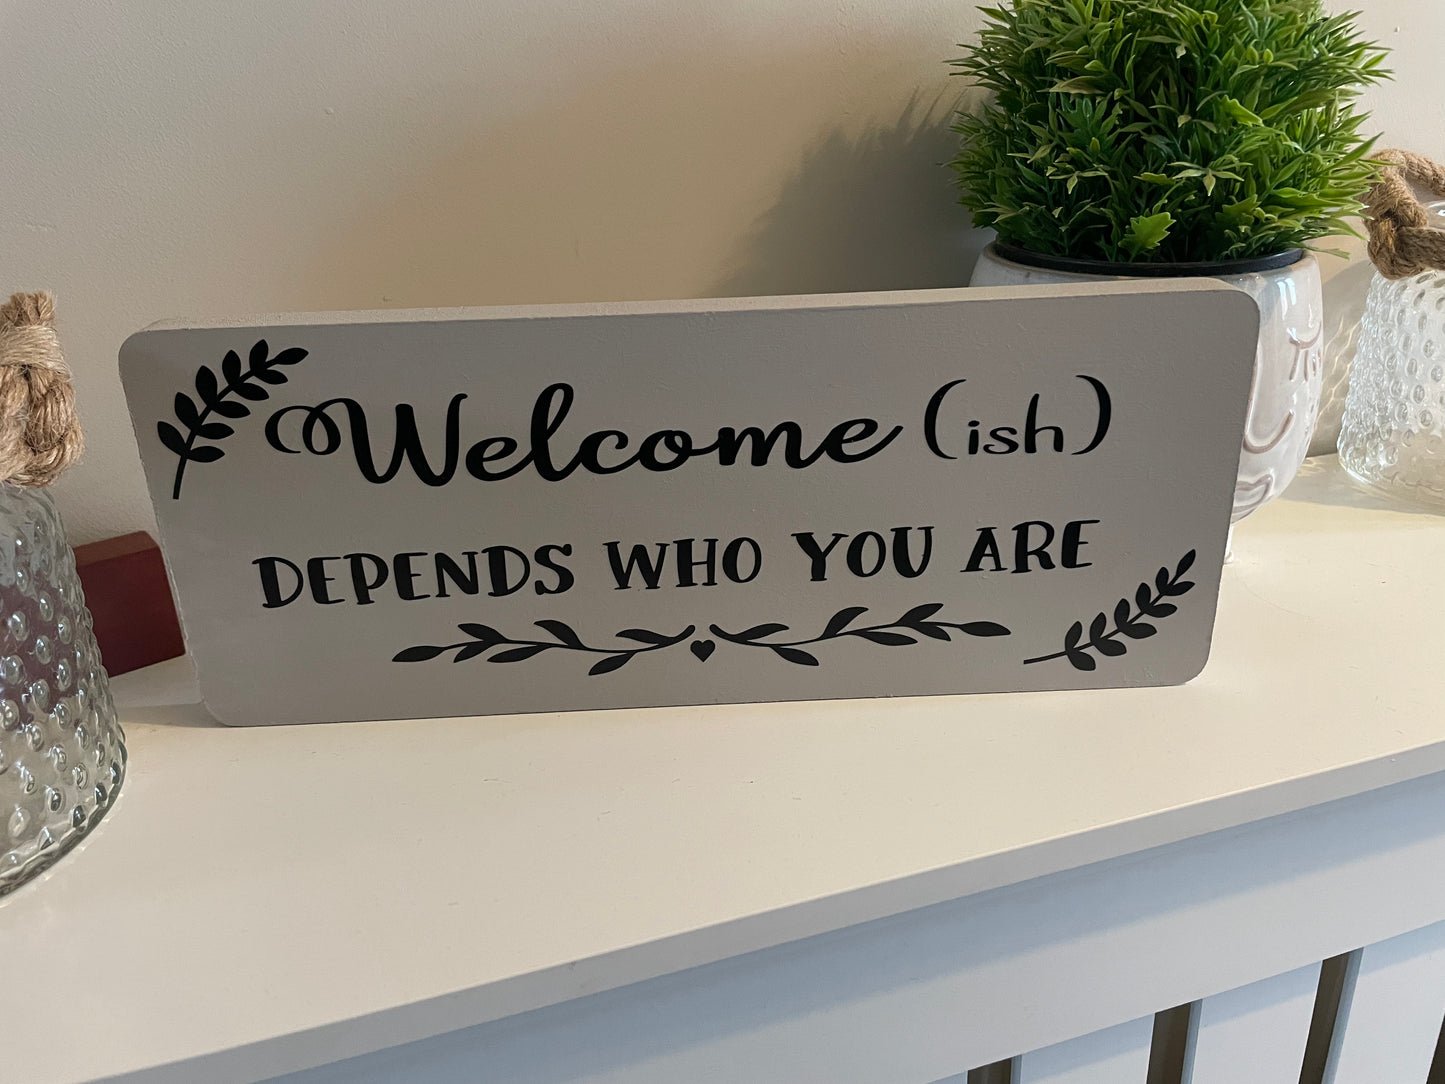 Welcome-ish depends who you are